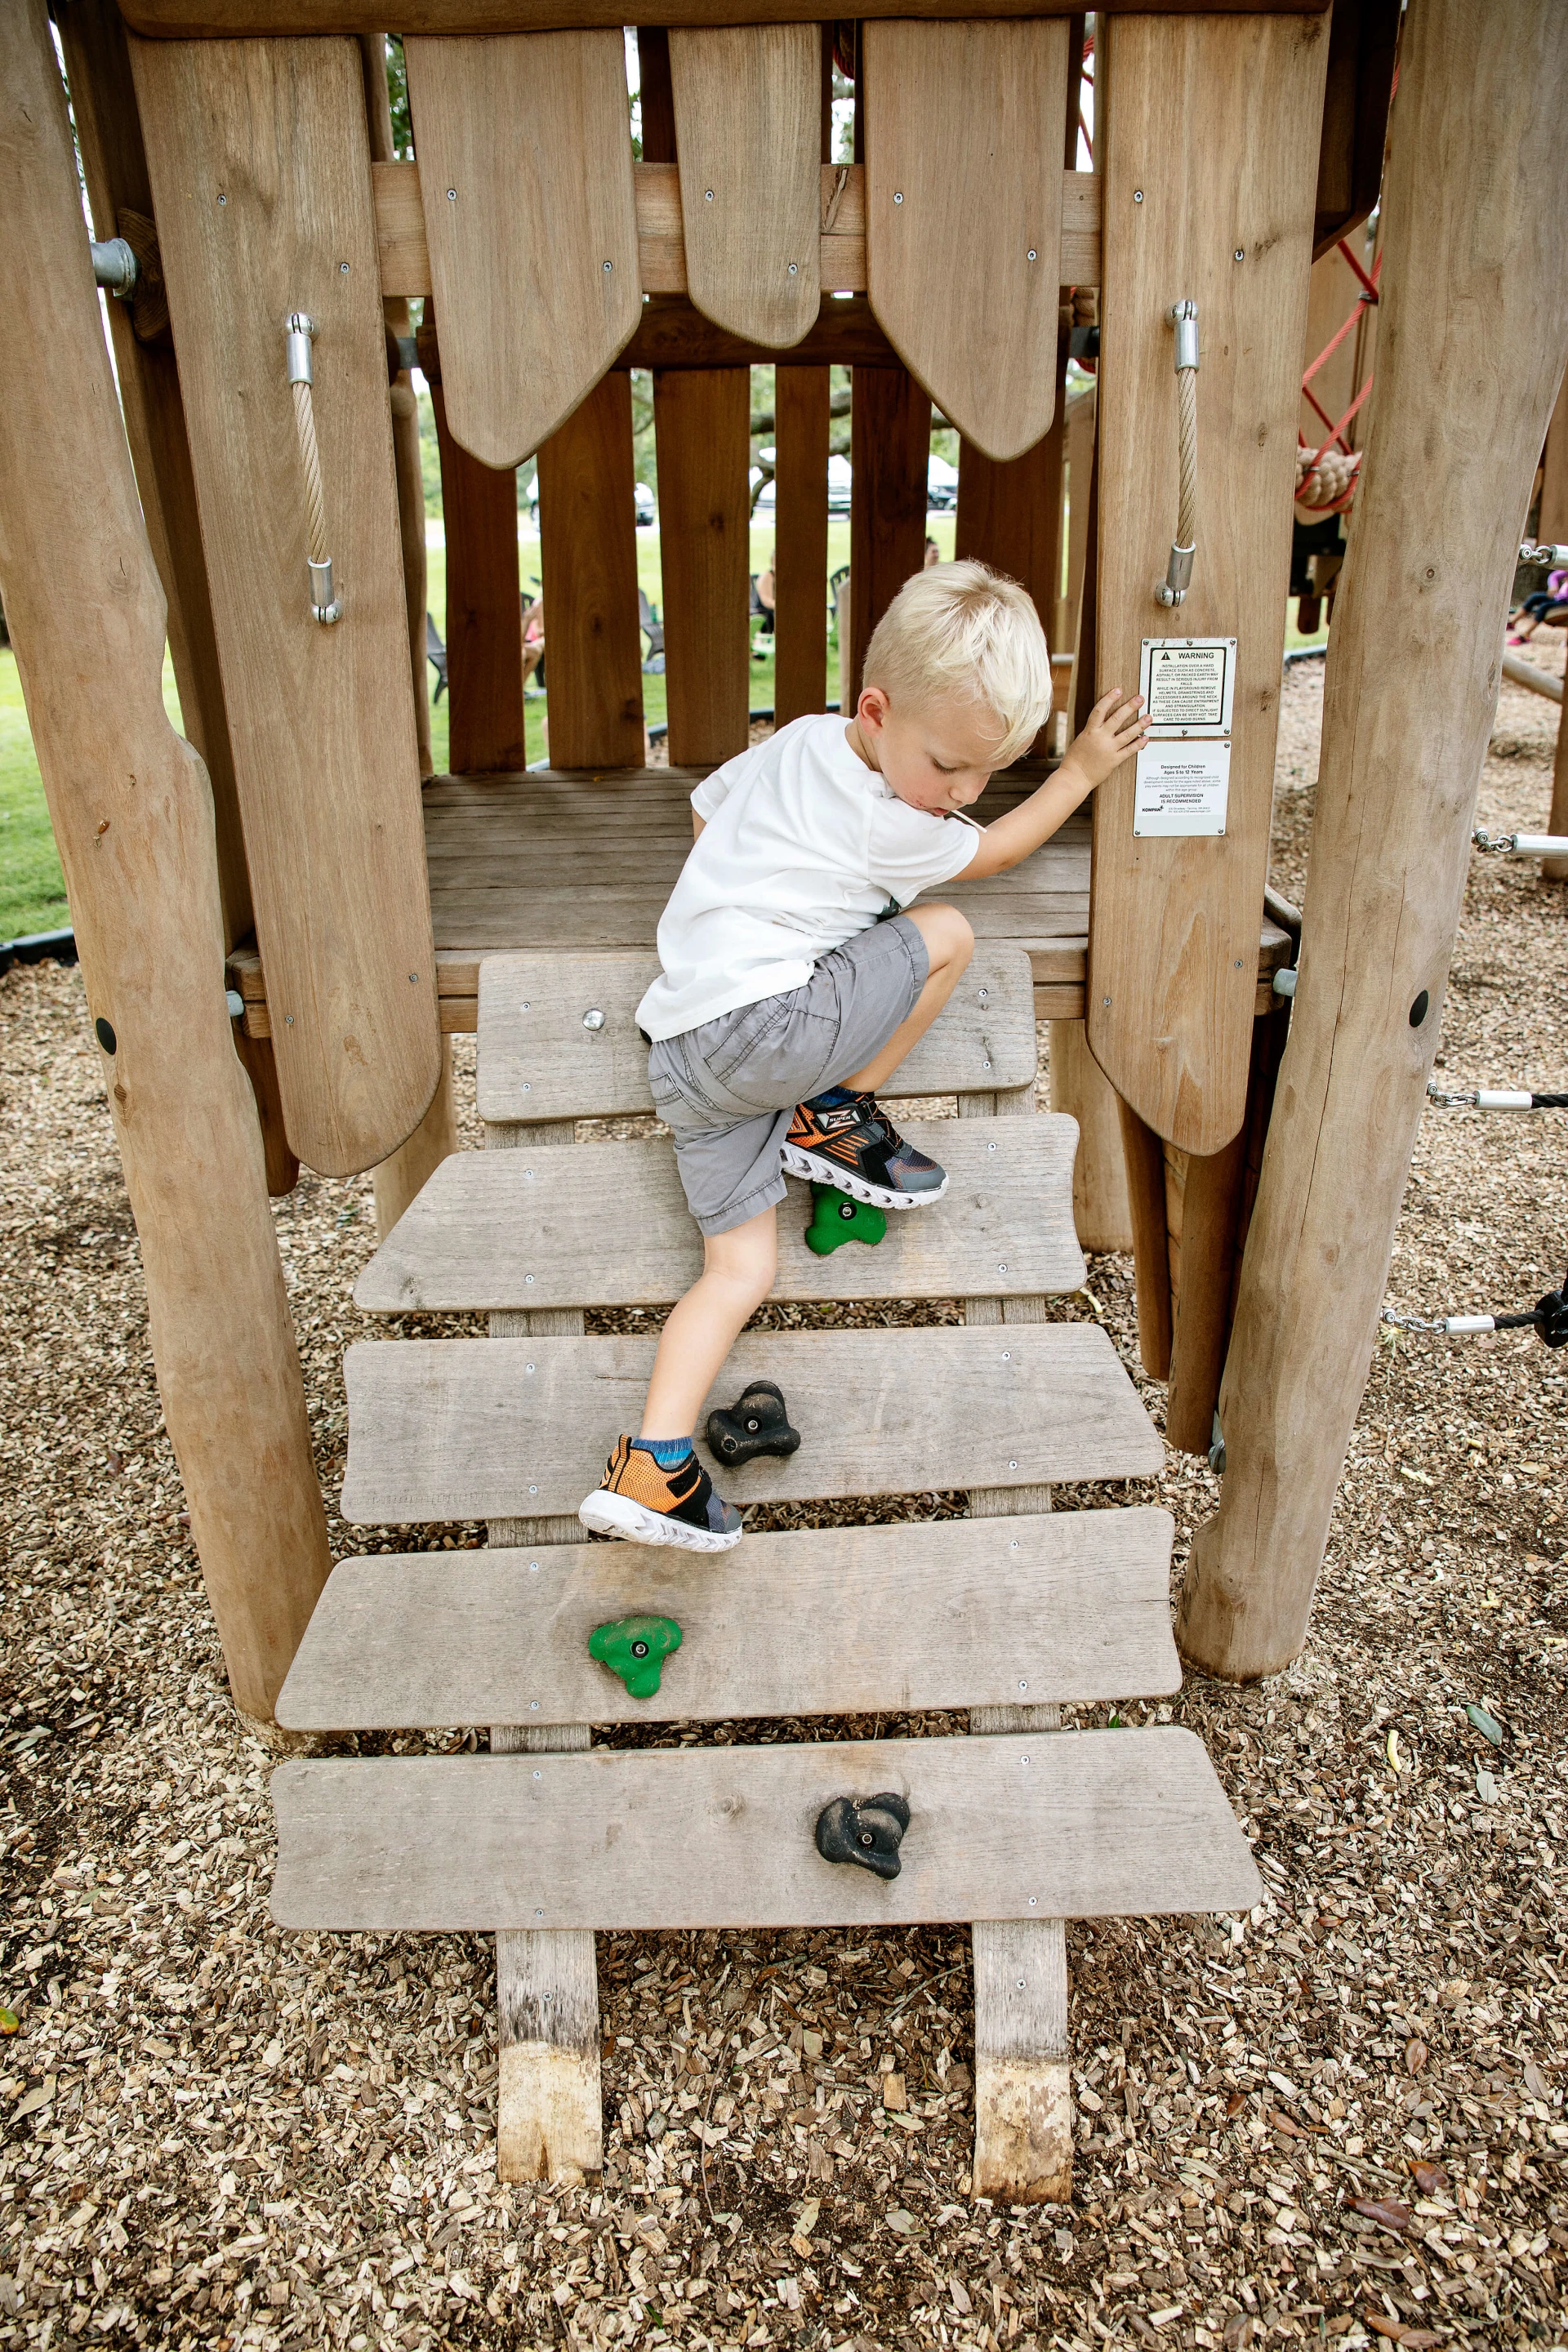 Playground equipment for 3-6 year-olds, boy climbing on wooden playground